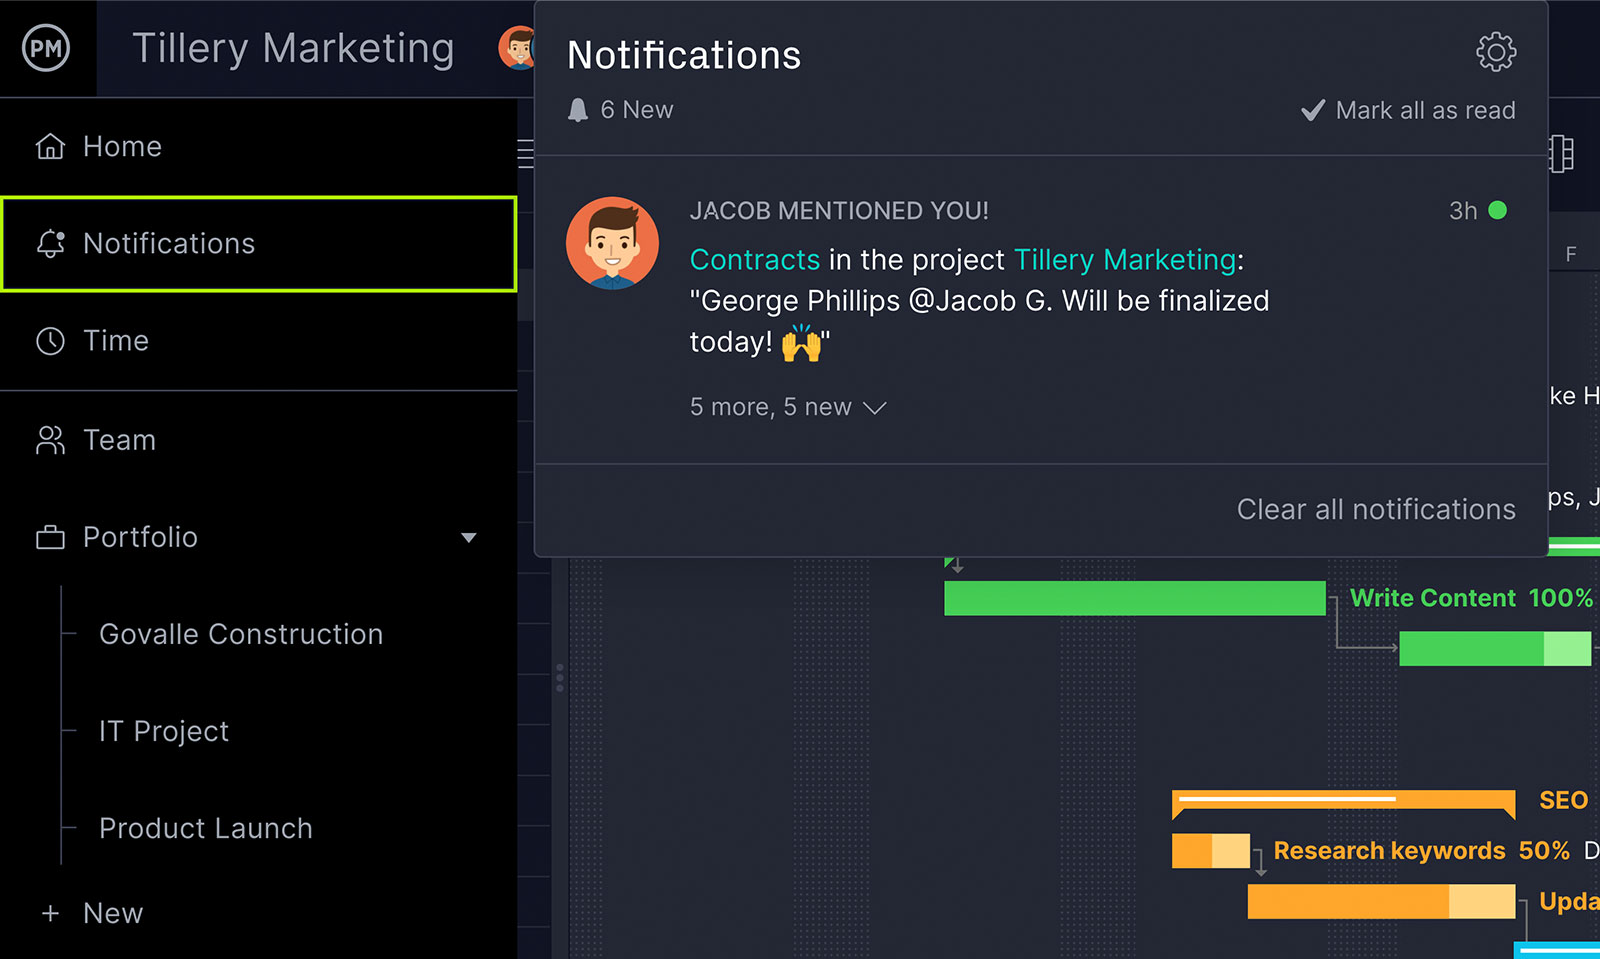 ProjectManager's notifications are a must-have tool for marketing teams